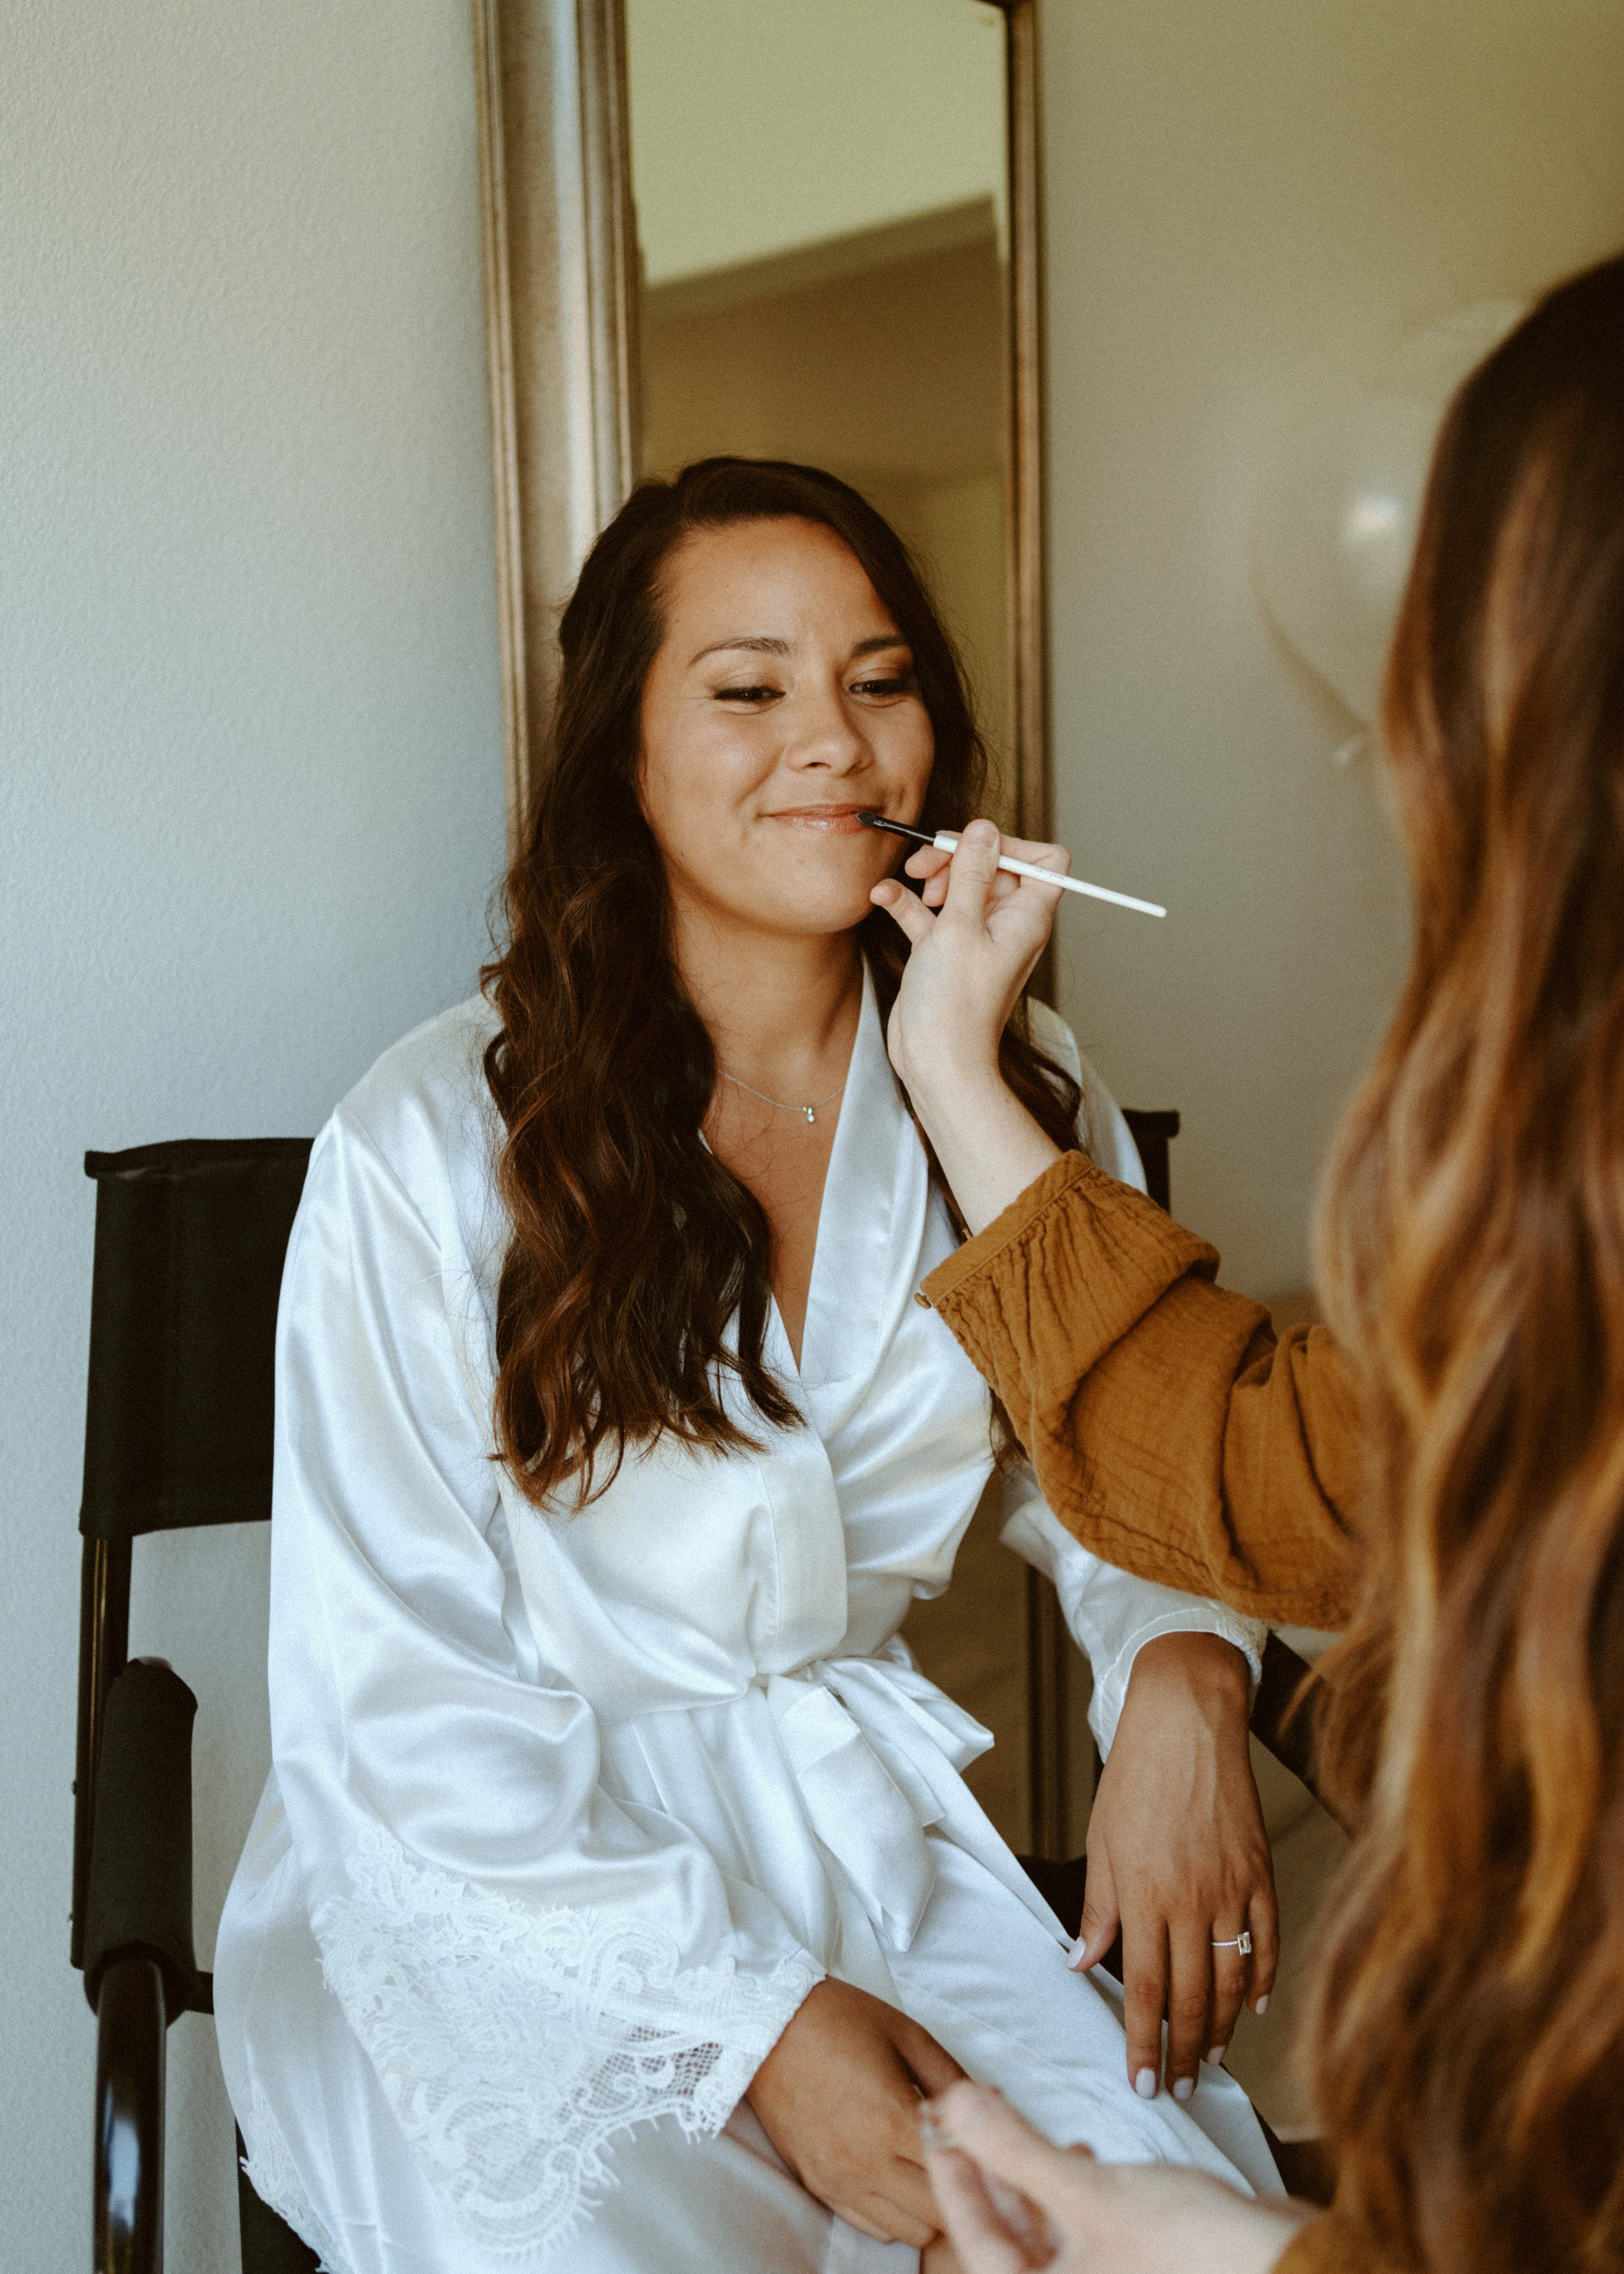 Why getting ready photos are important on an elopement day | wedding planning tips | destination wedding photographer | elopement planner